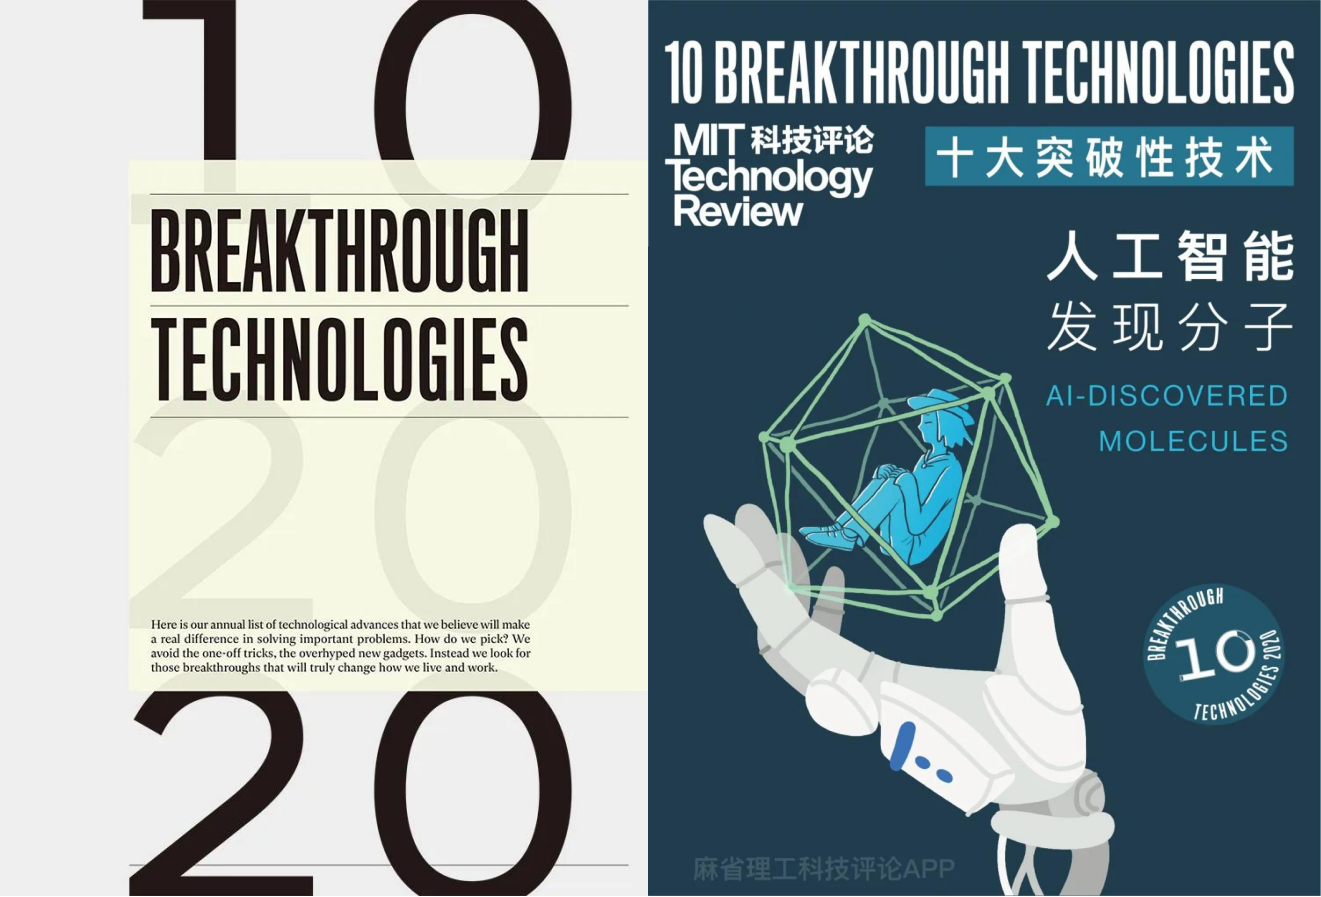 Selected as the top ten breakthrough technologies in MIT Technology Review,